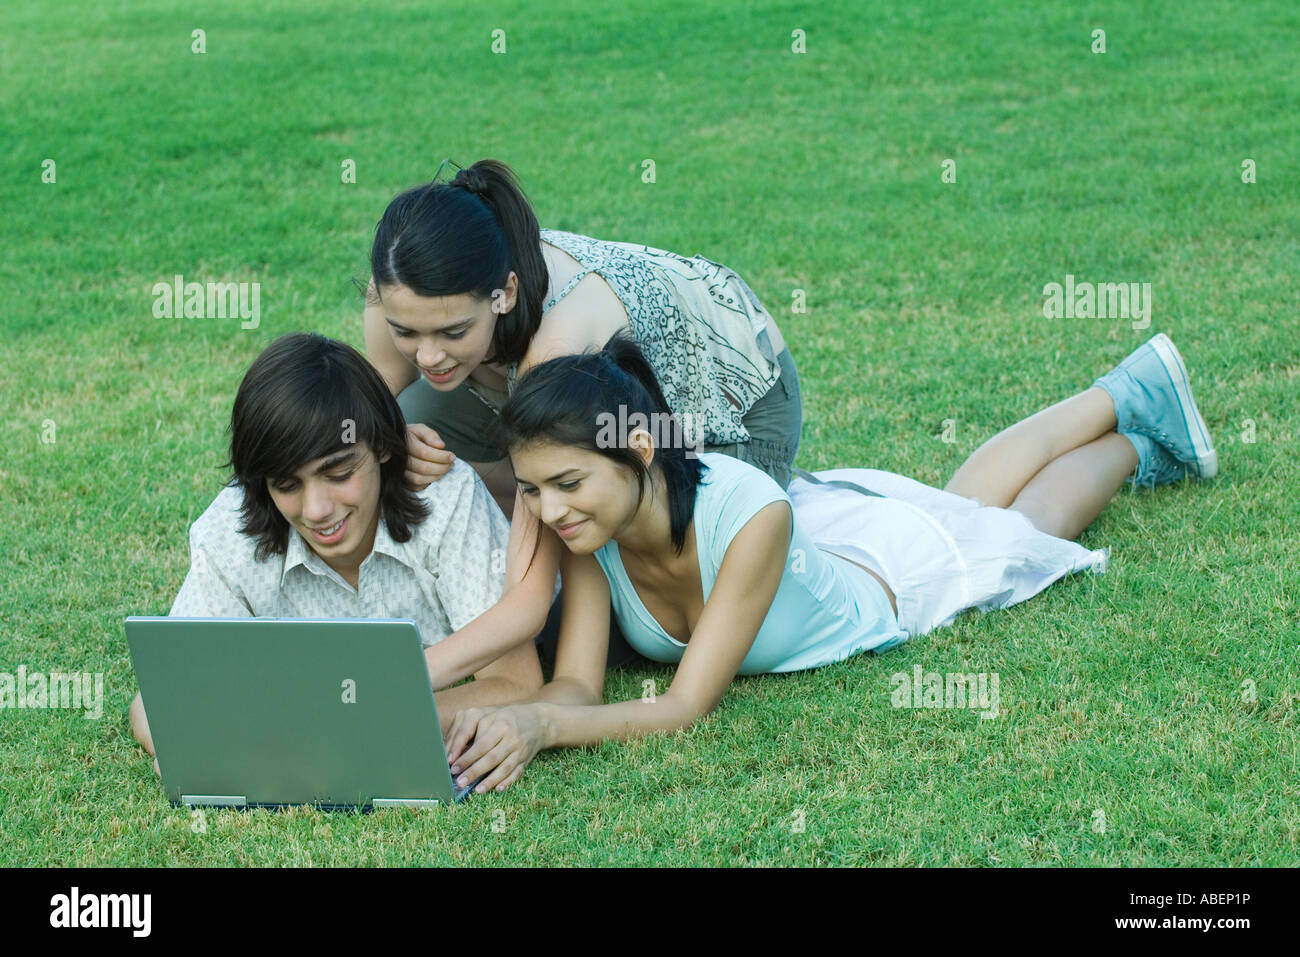 Young friends lying in grass, using laptop together Stock Photo